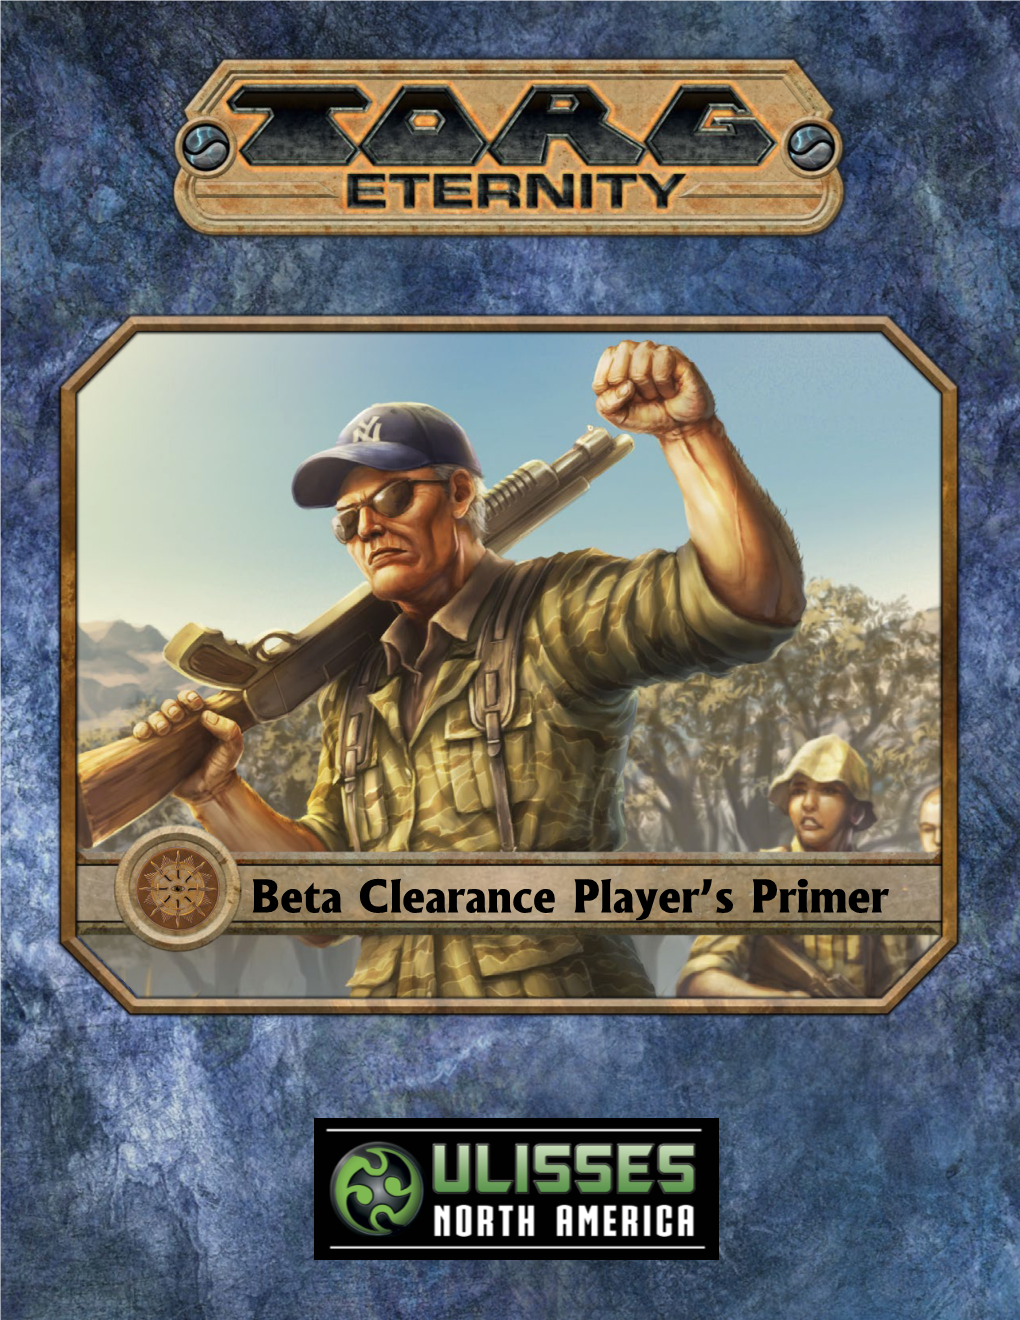 Beta Clearance Player's Primer